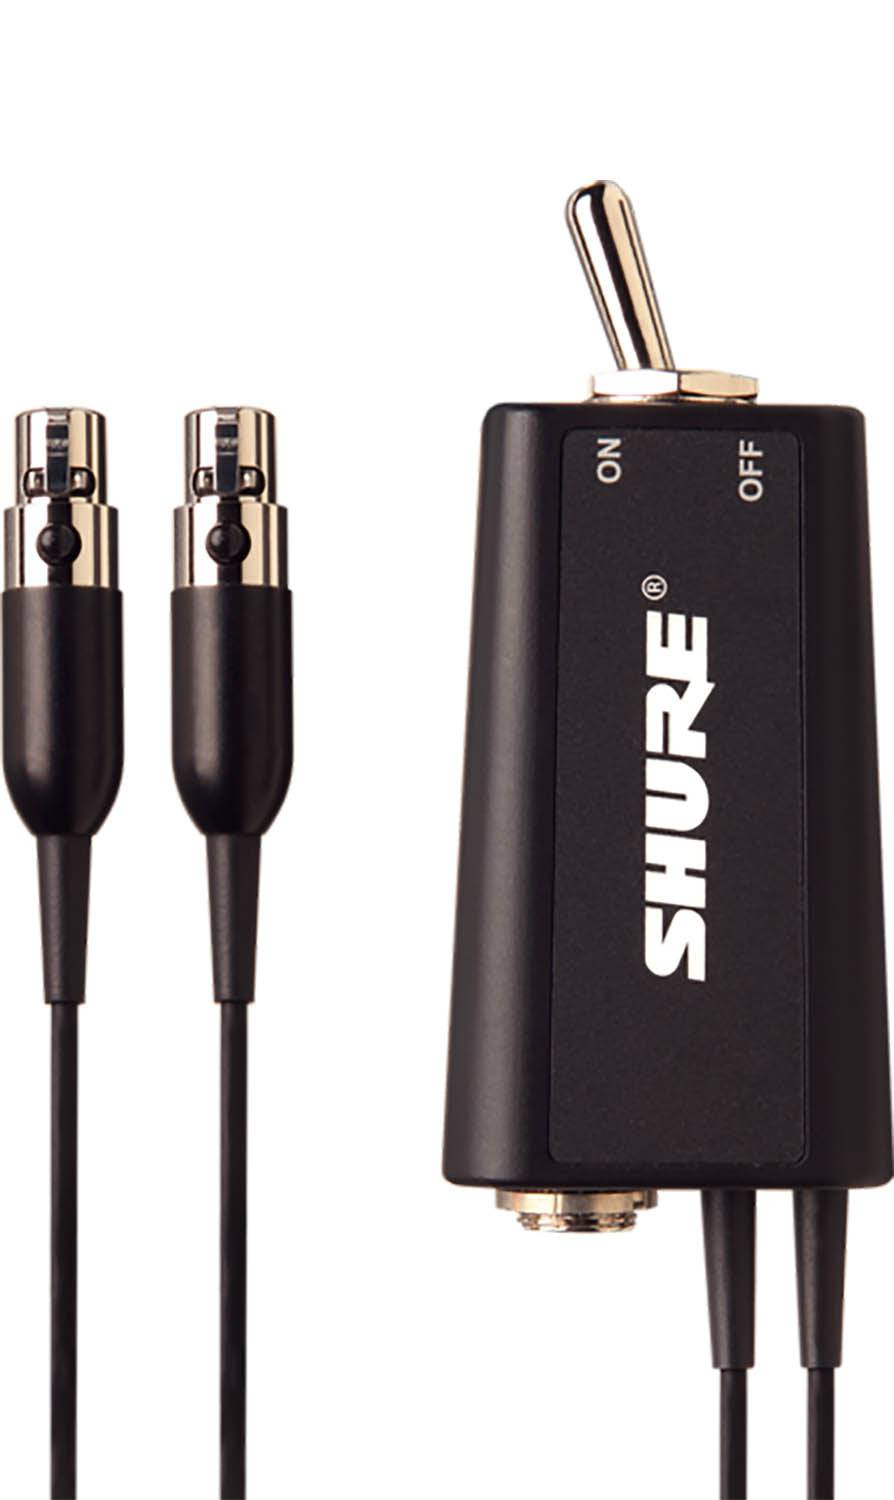 Shure WA662 Mute Switch for 2 Bodypack Transmitters - Hollywood DJ